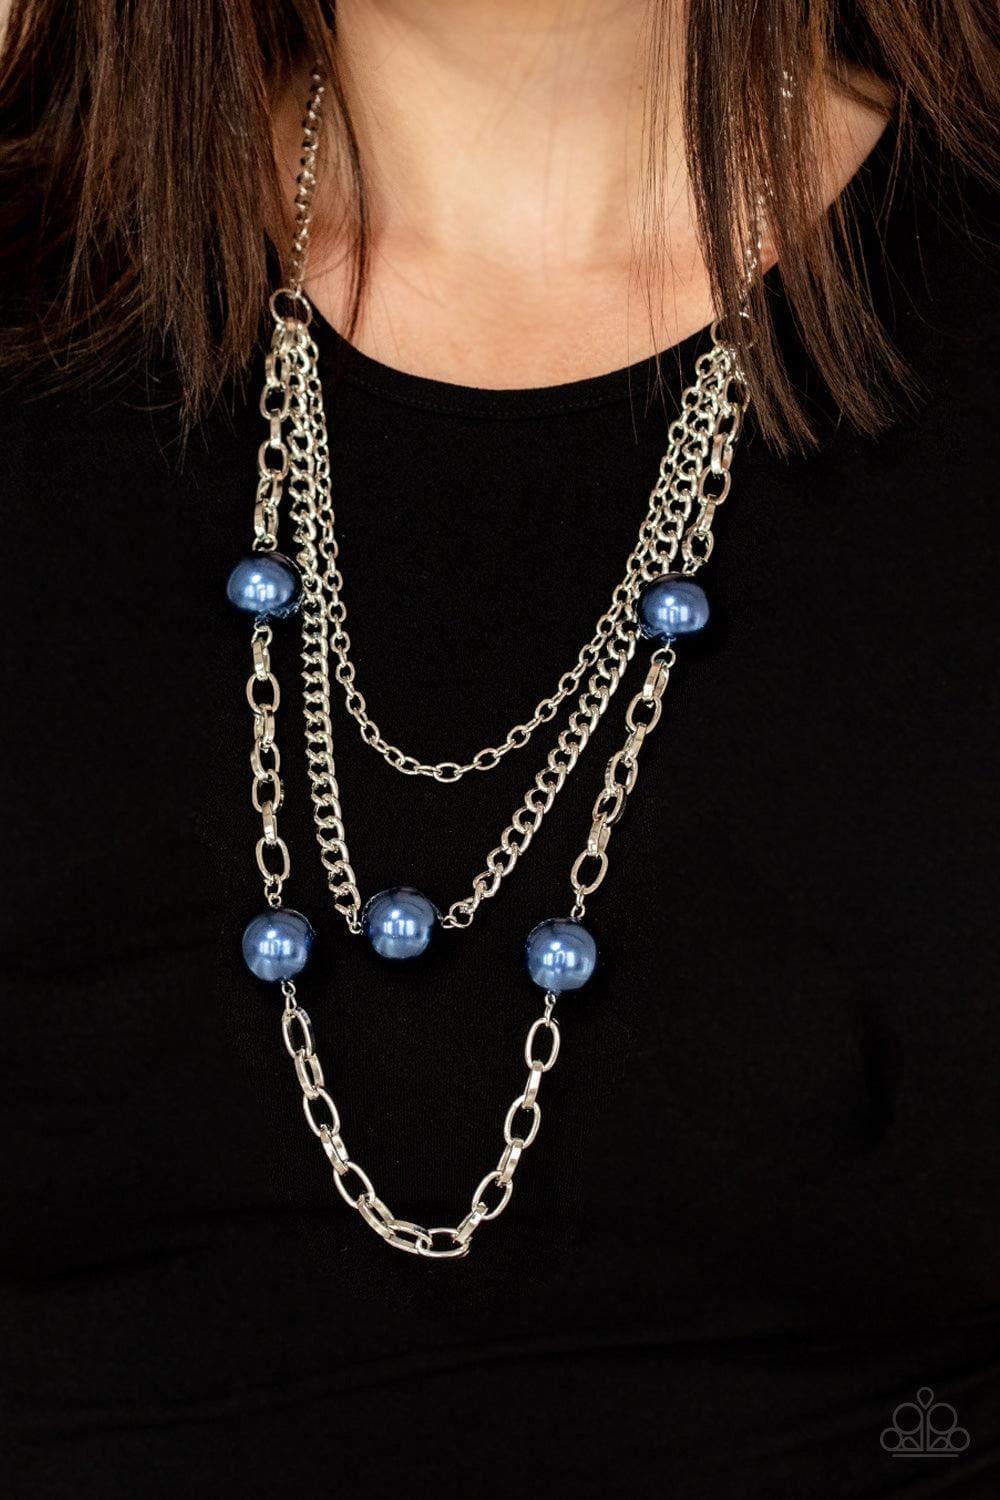 Paparazzi Accessories - Thanks For The Compliment - Blue Neckless - Bling by JessieK